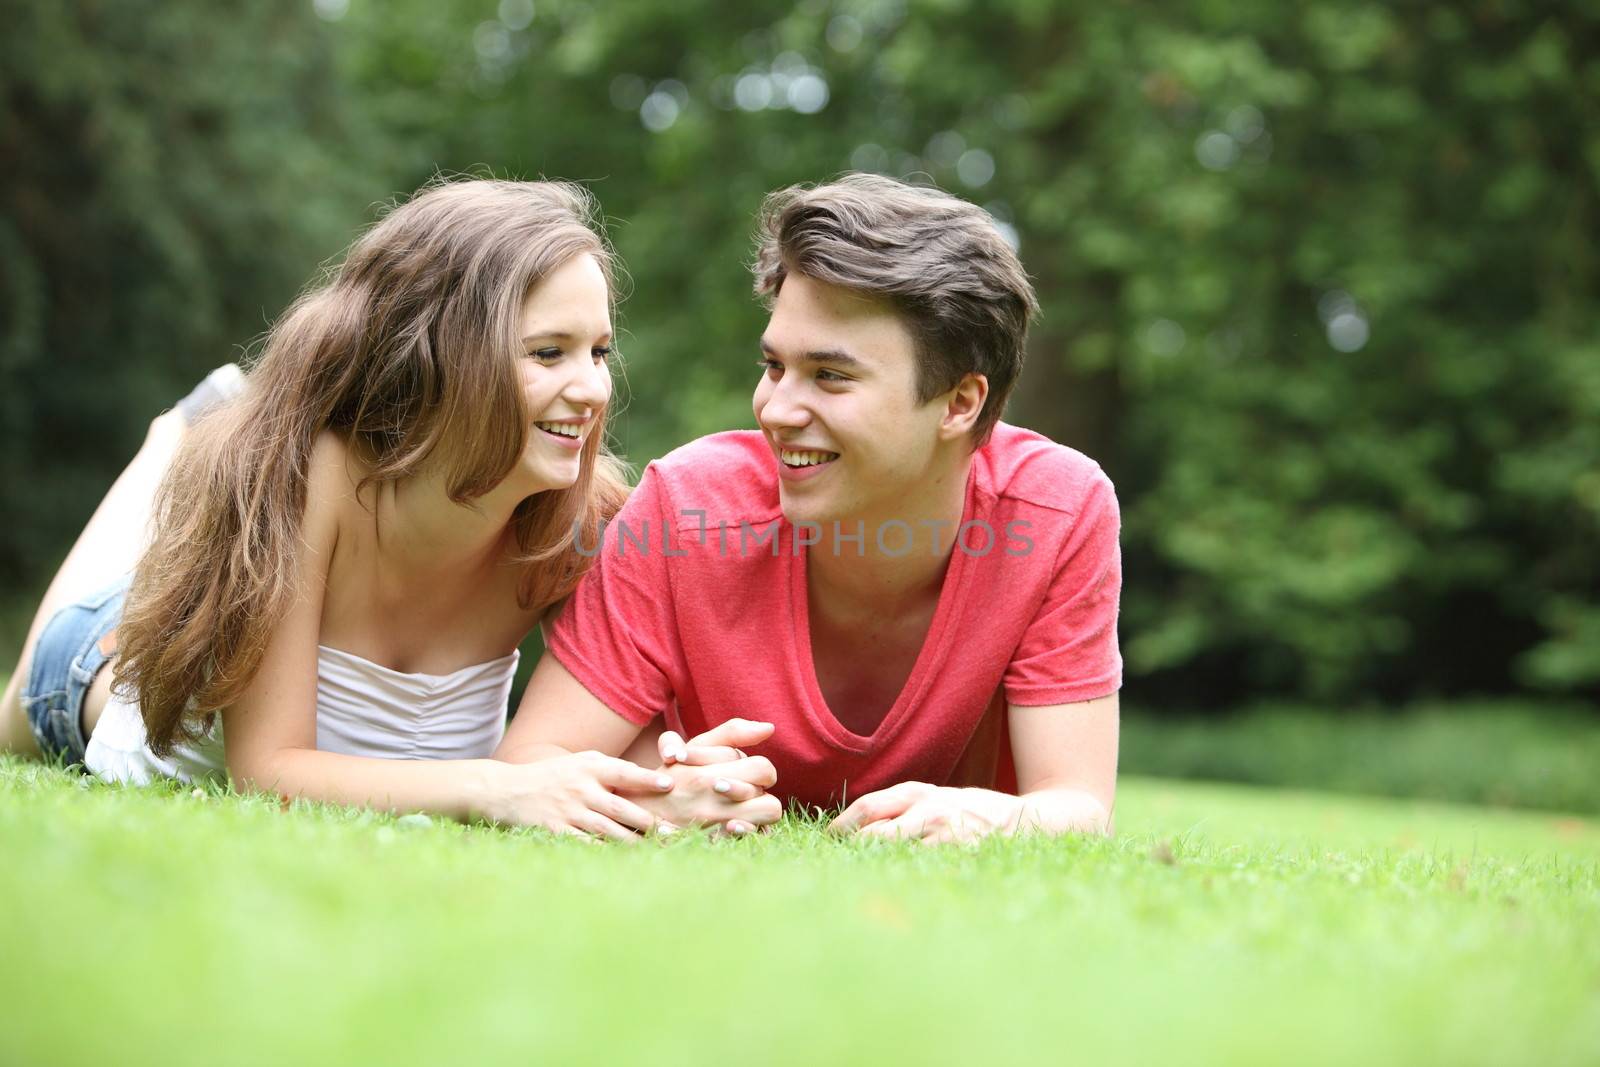 Teenage boy and girl lying on the grass holding hands and smiling at each other as they relax in the sunshine